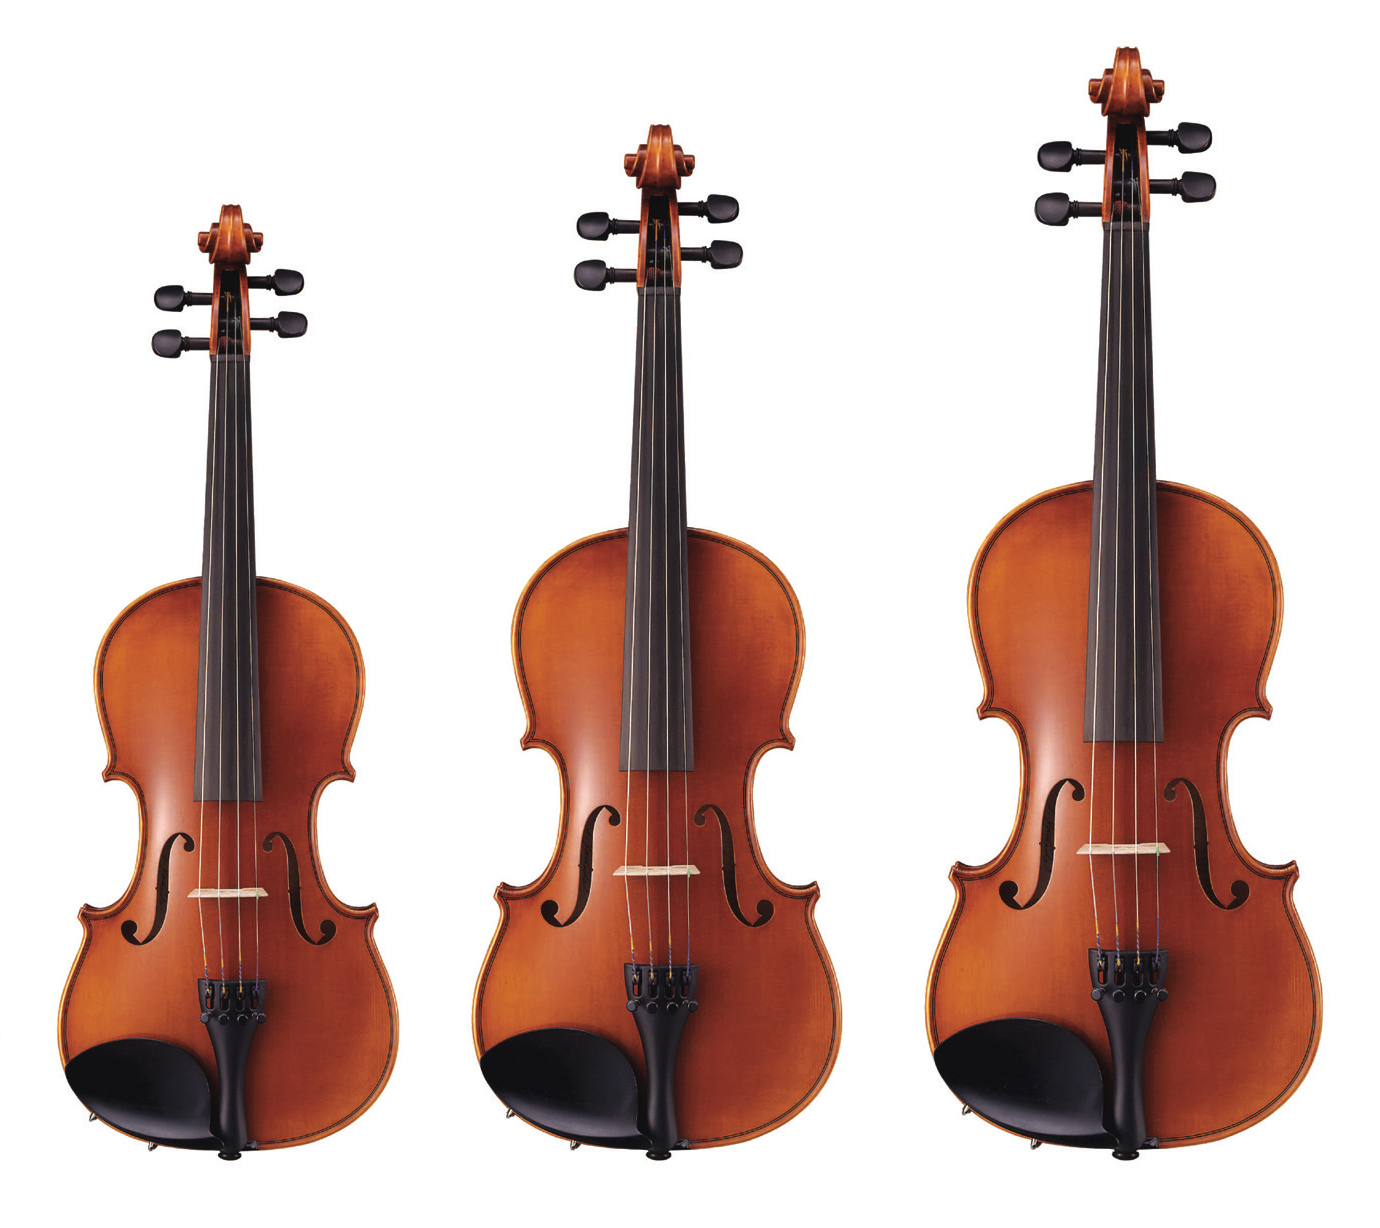 What Is a Fractional Size Violin?